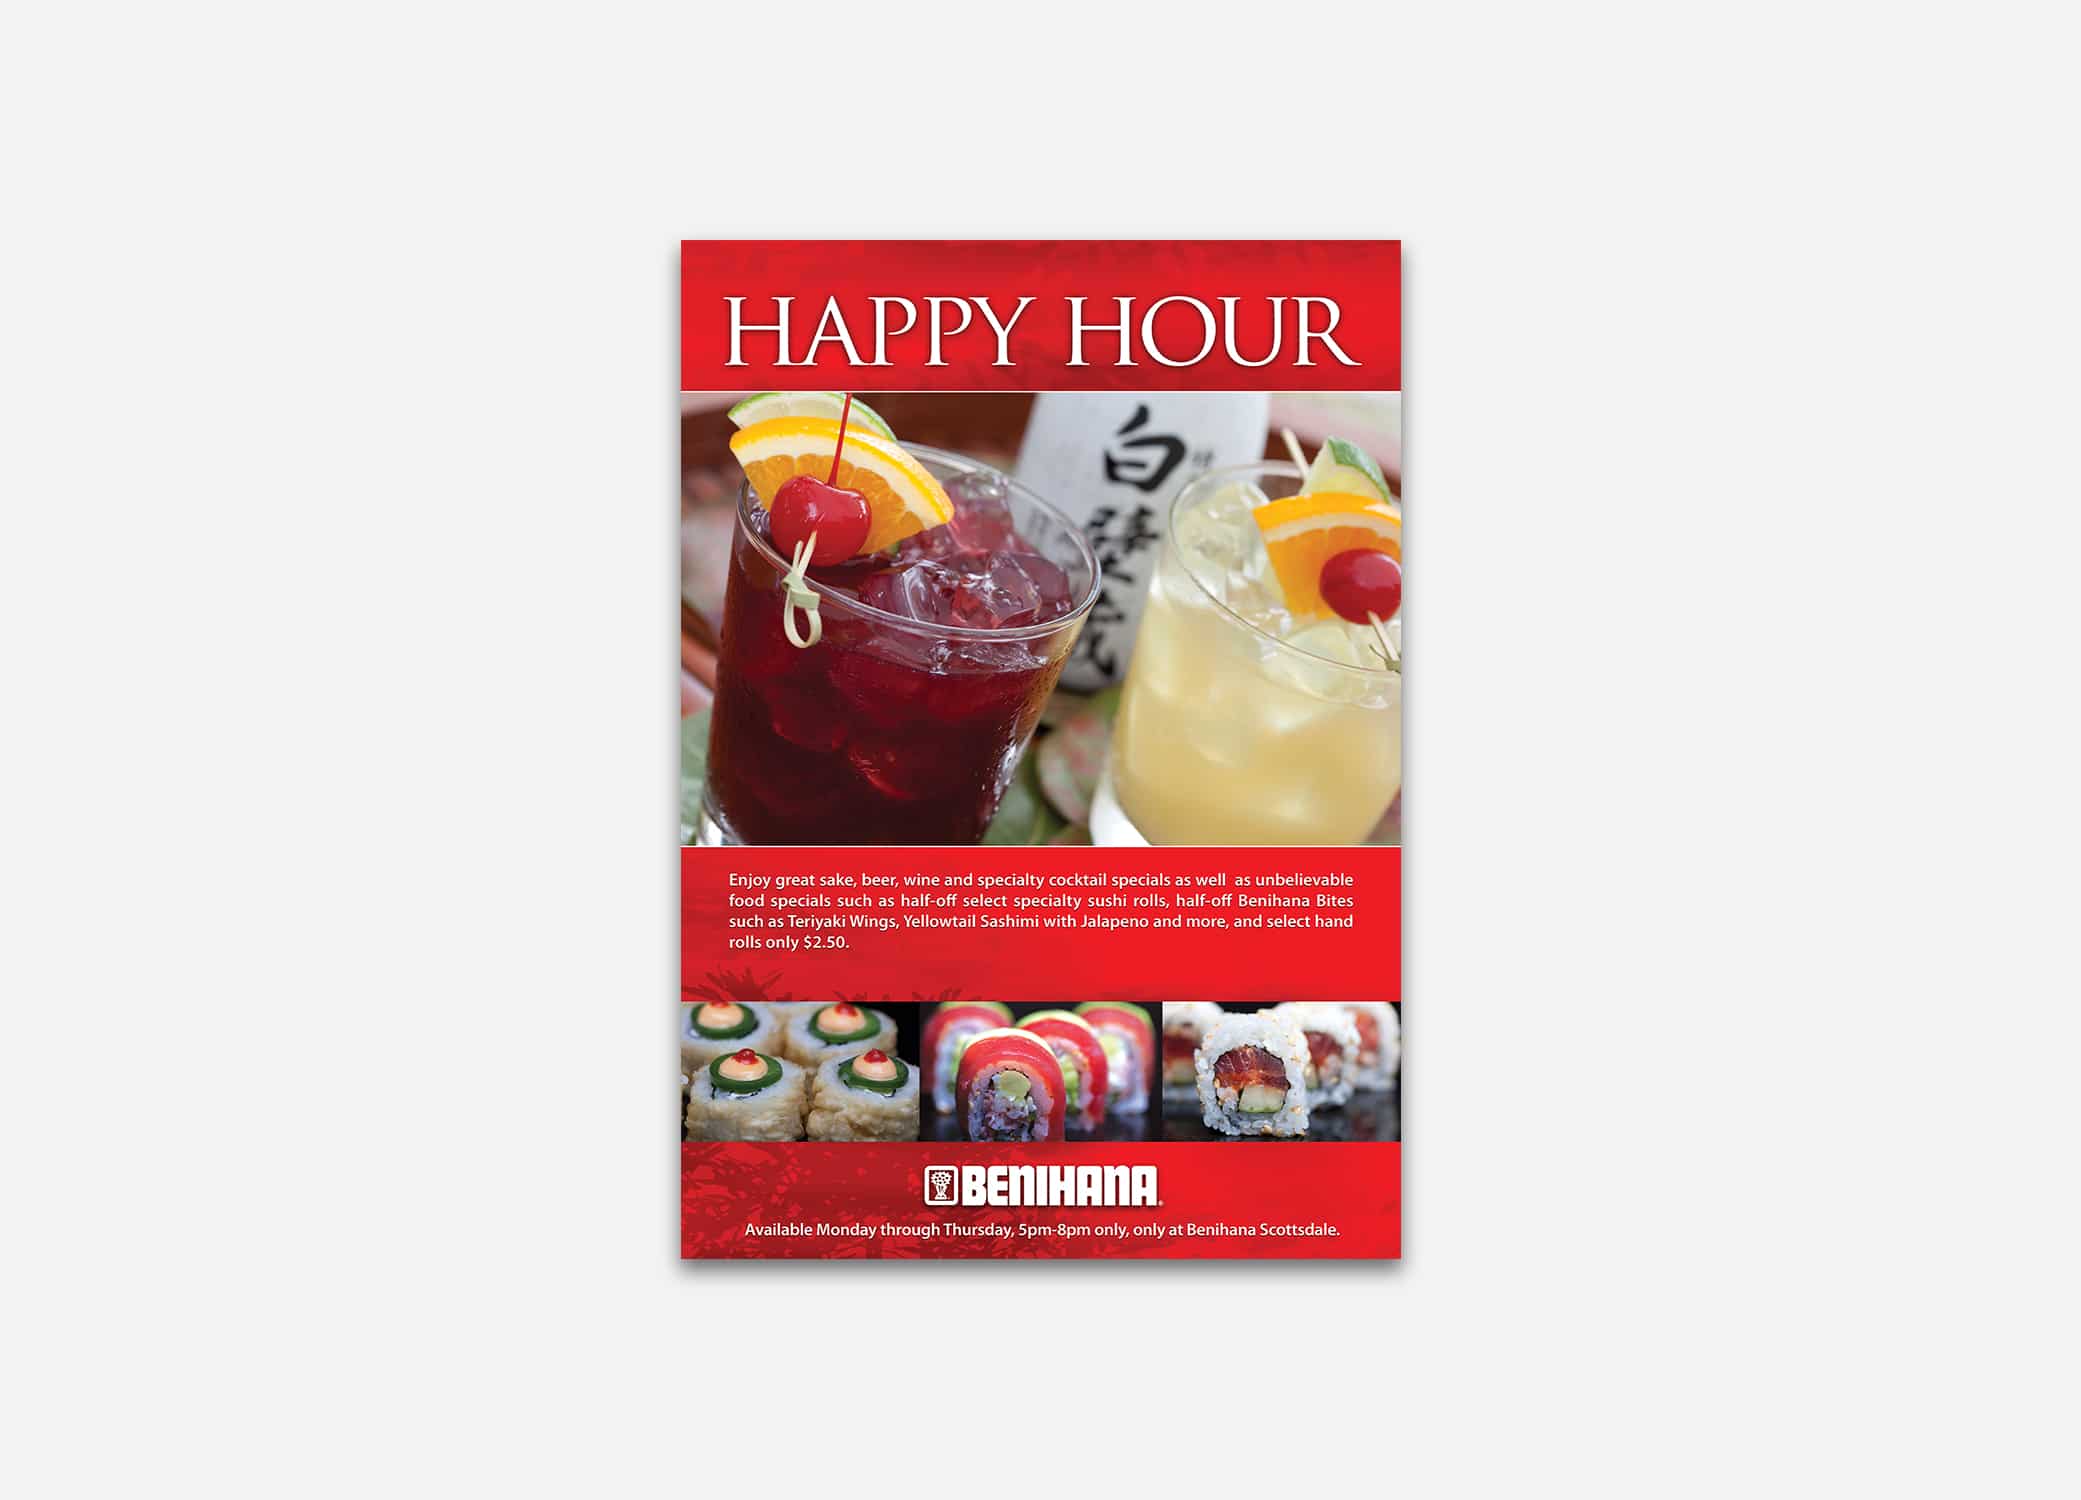 Benihana food brand design for email marketing campaign featuring happy hour drinks promotion against grey backdrop.